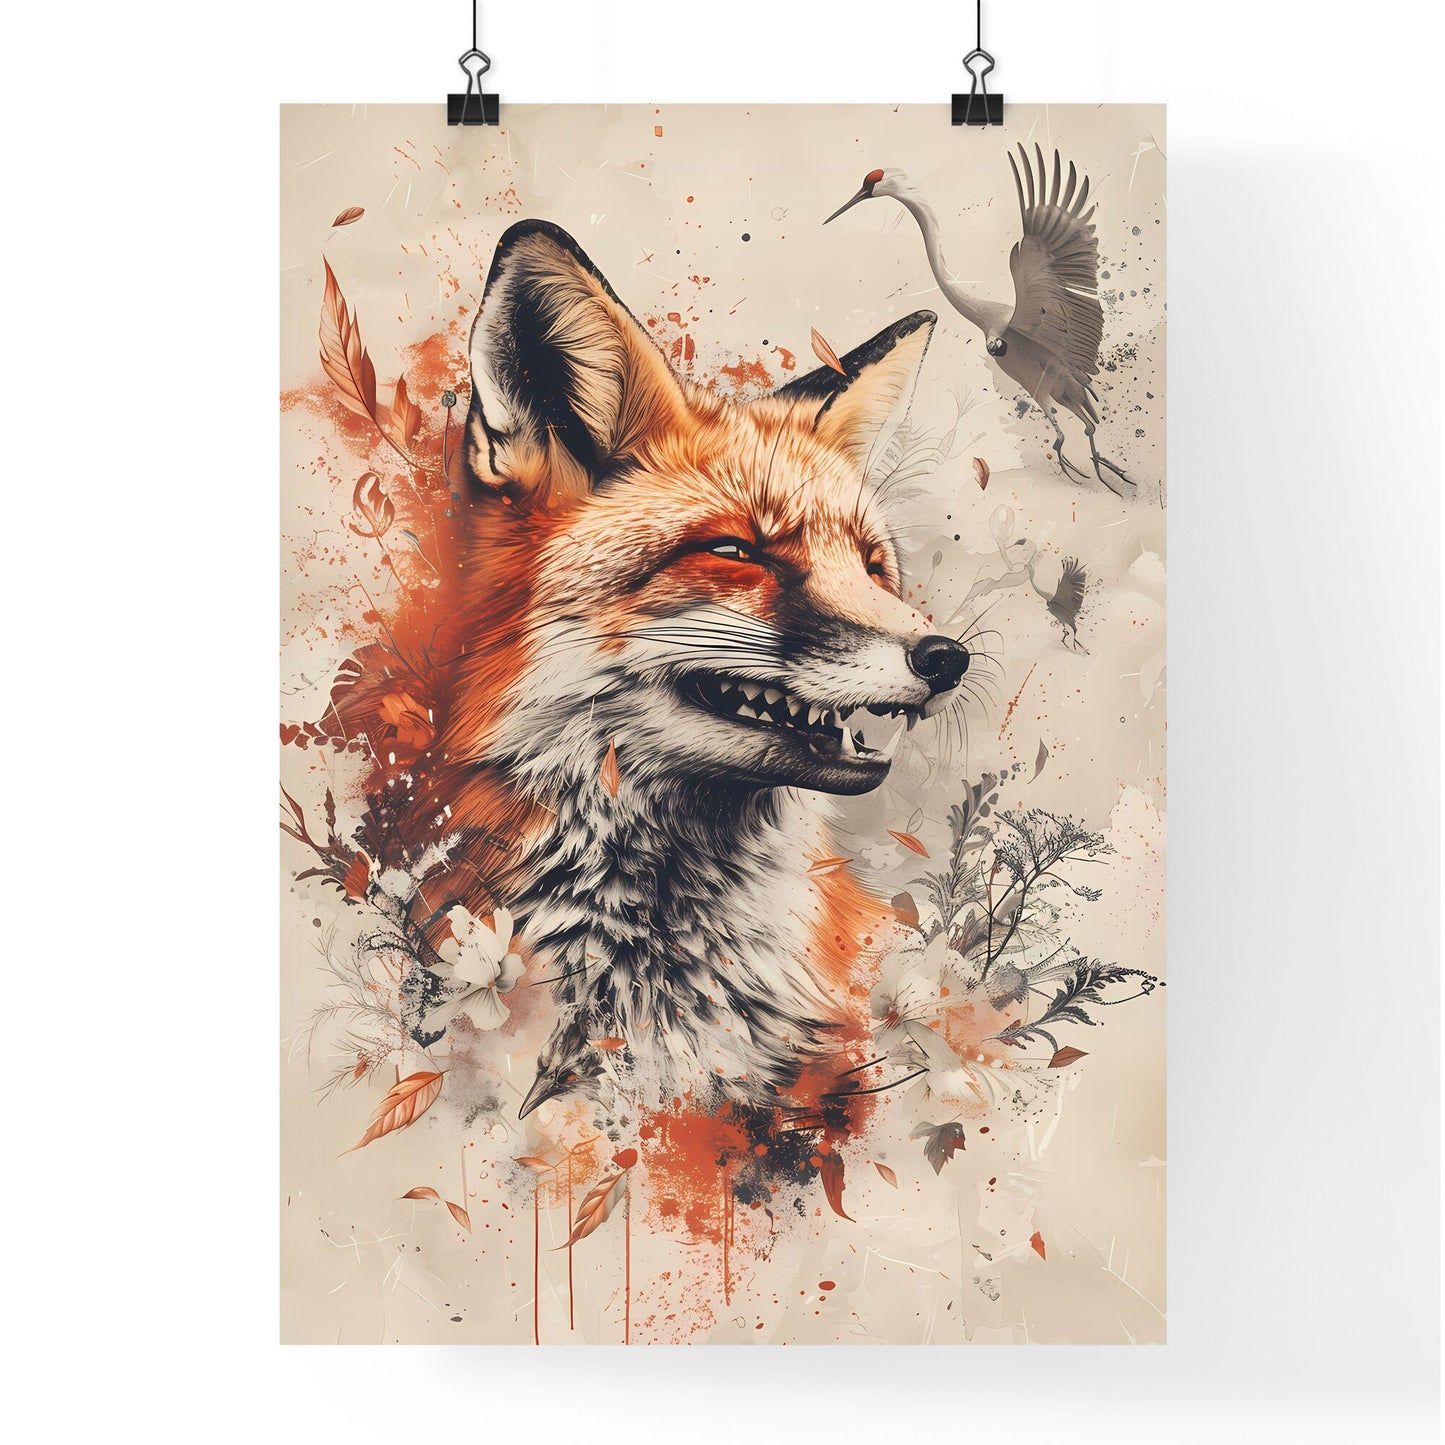 Enchanted Watercolor Fox and Crane: Sublime Macabre Art in the Style of Mexican and American Cultures Default Title